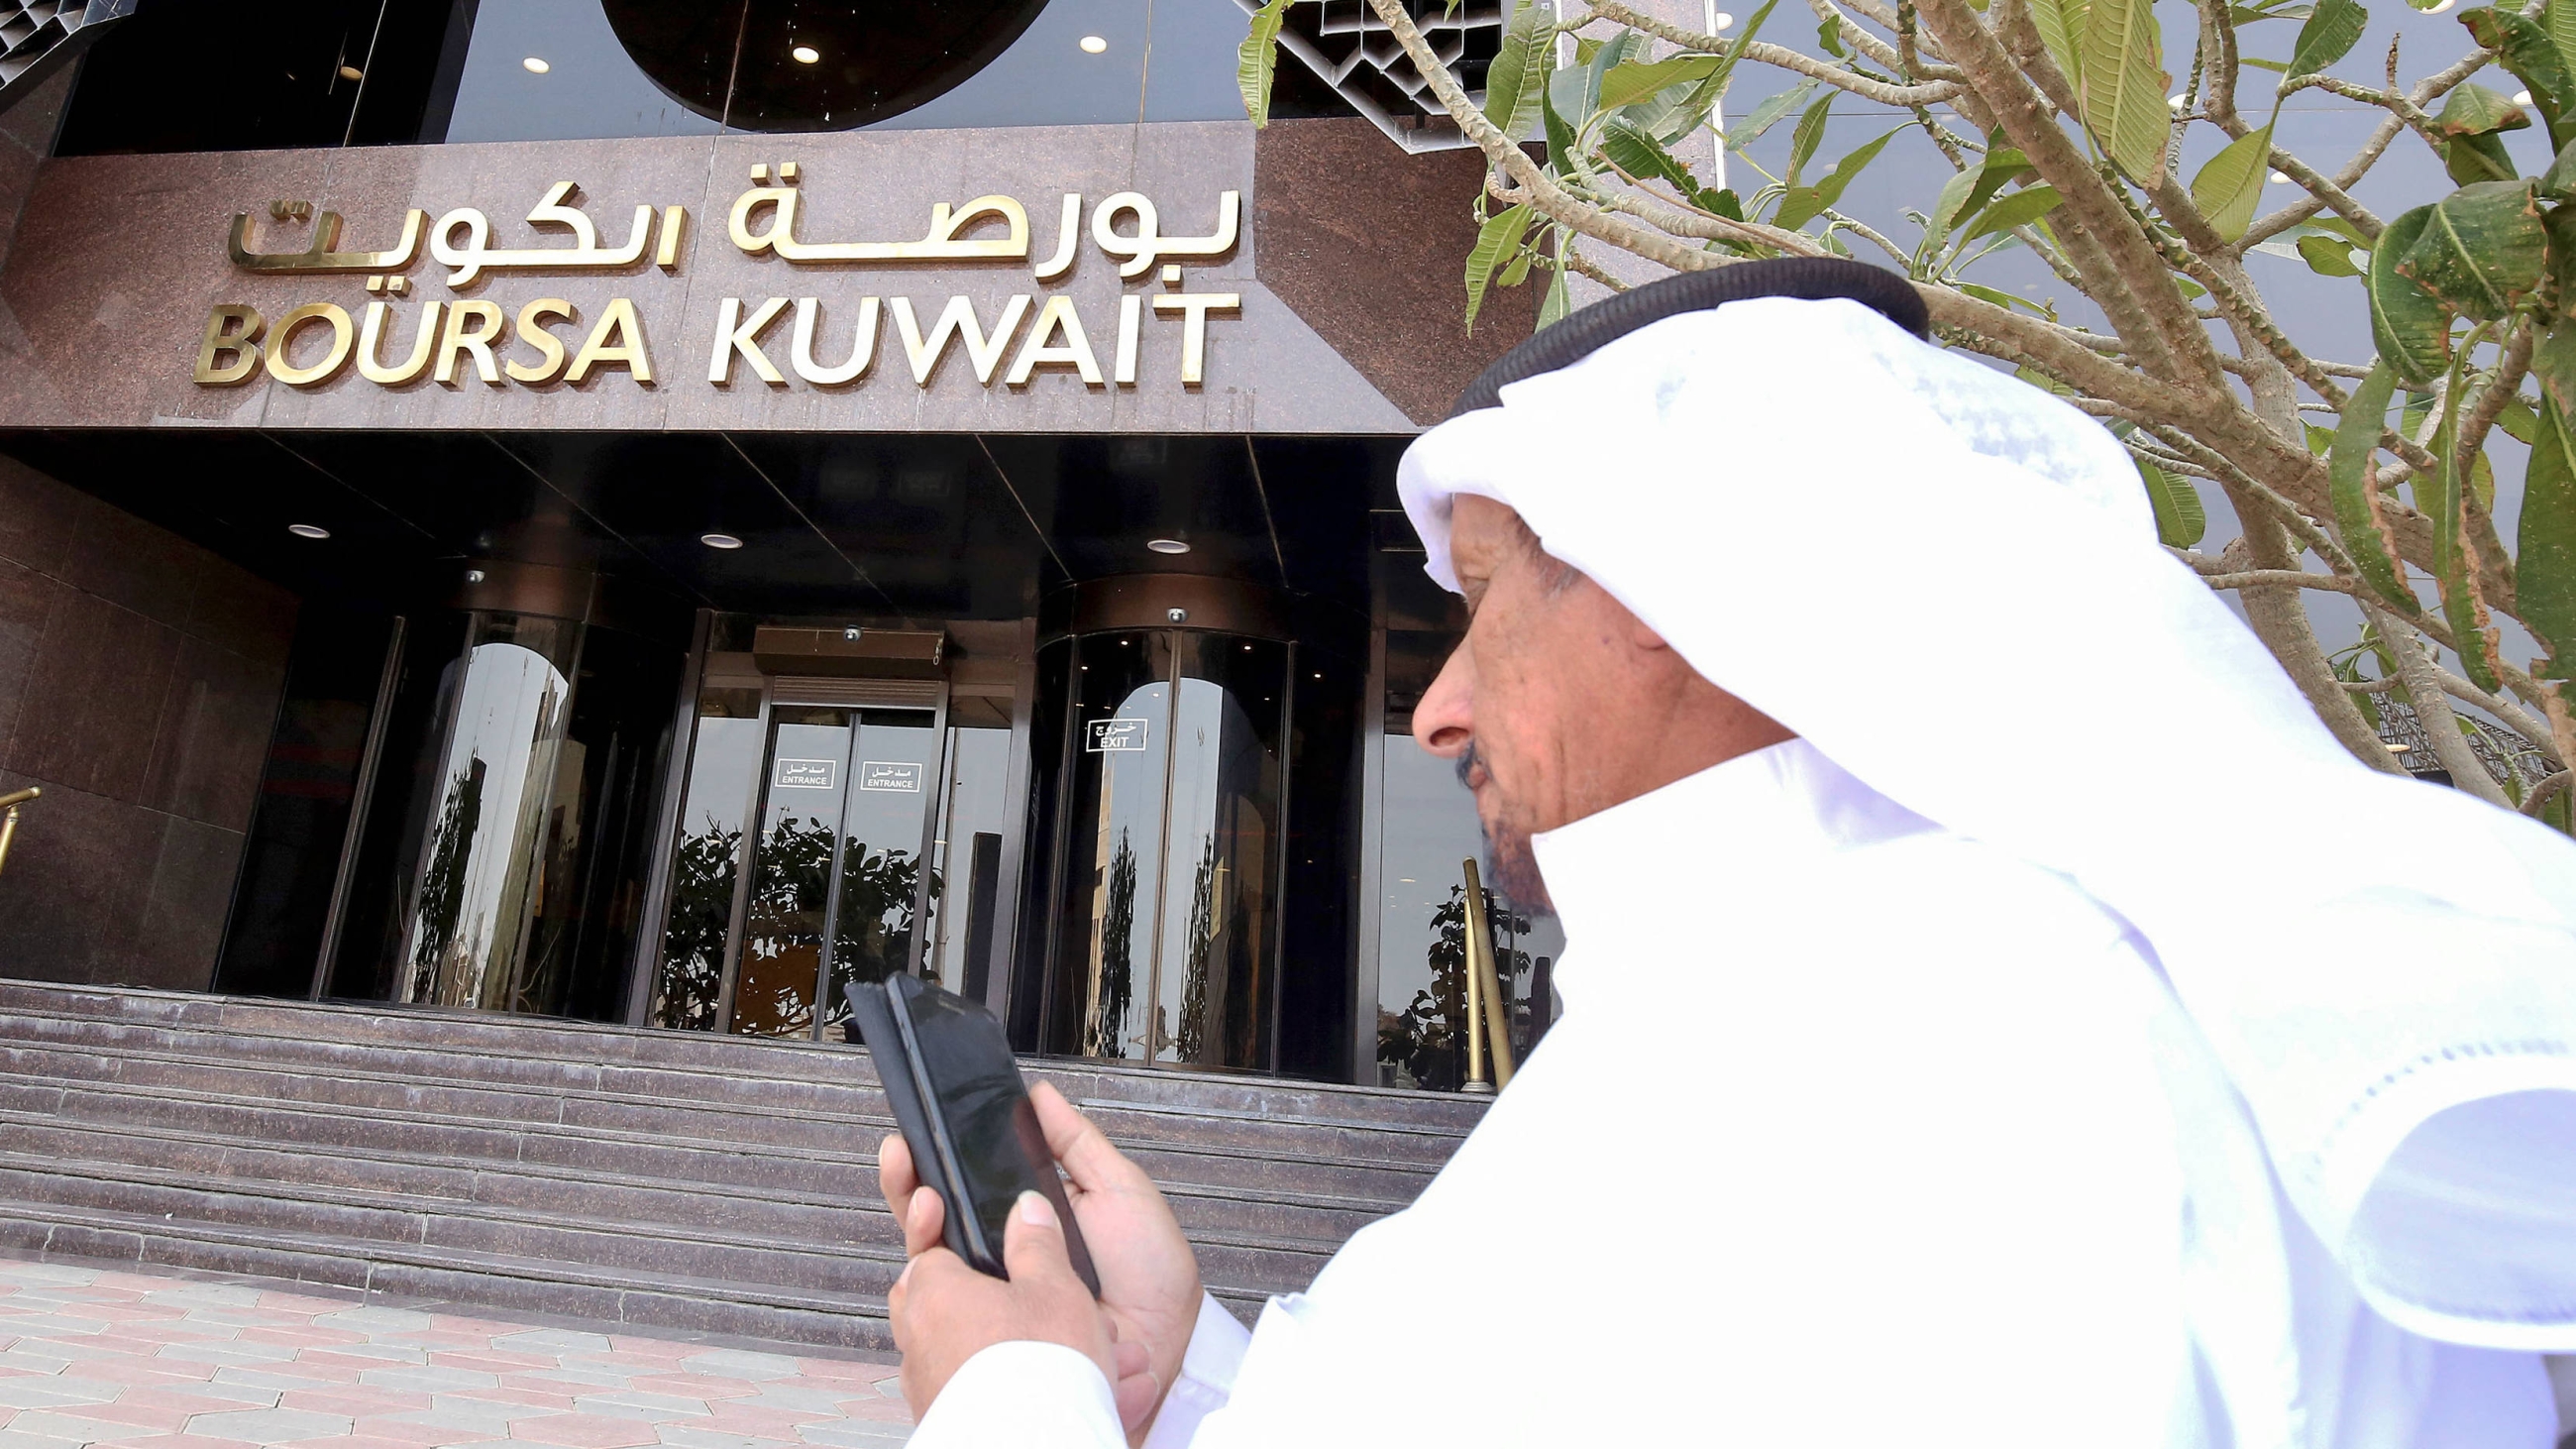 A Kuwaiti trader checks his phone at the entrance of the Boursa Kuwait financial market in Kuwait City, on 8 March 2020 (AFP)